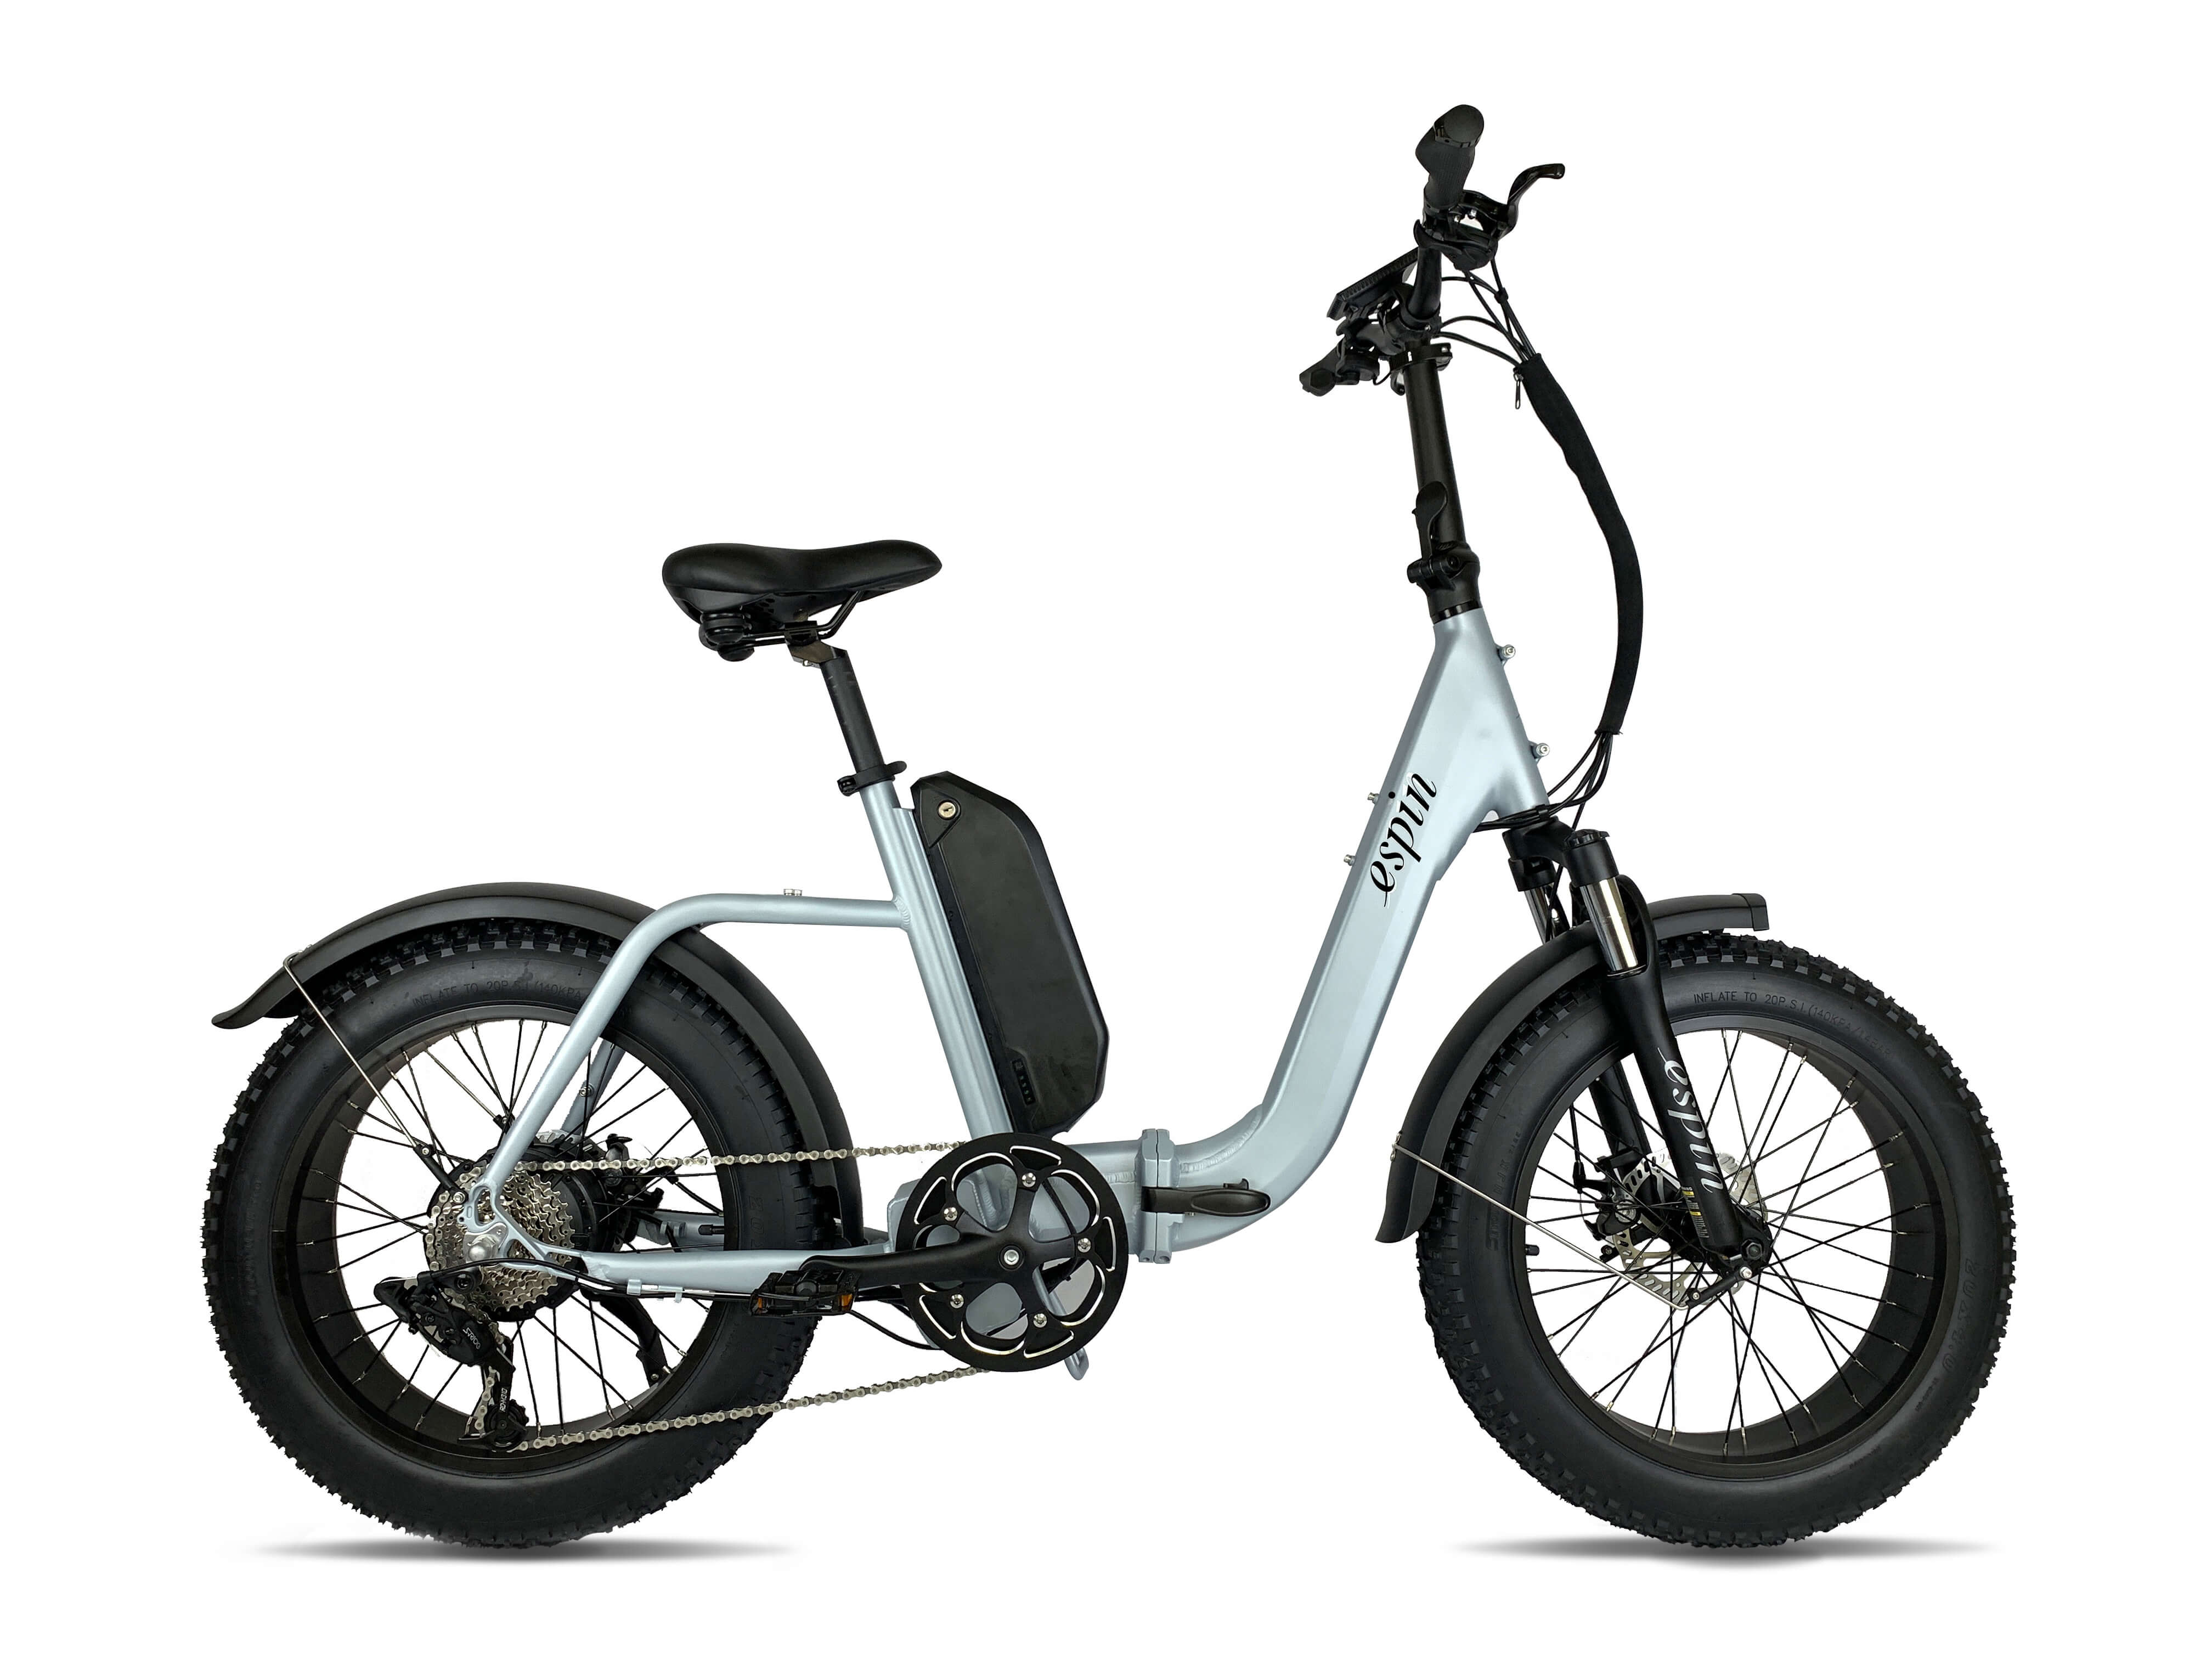 Espin nesta Folding Fat Tire Electric Bike & City Bicycle & urban commuter & cruise bikes is a capable and affordable fat tire off-road electric bike with step-through frame that is ready to conquer any and all terrain